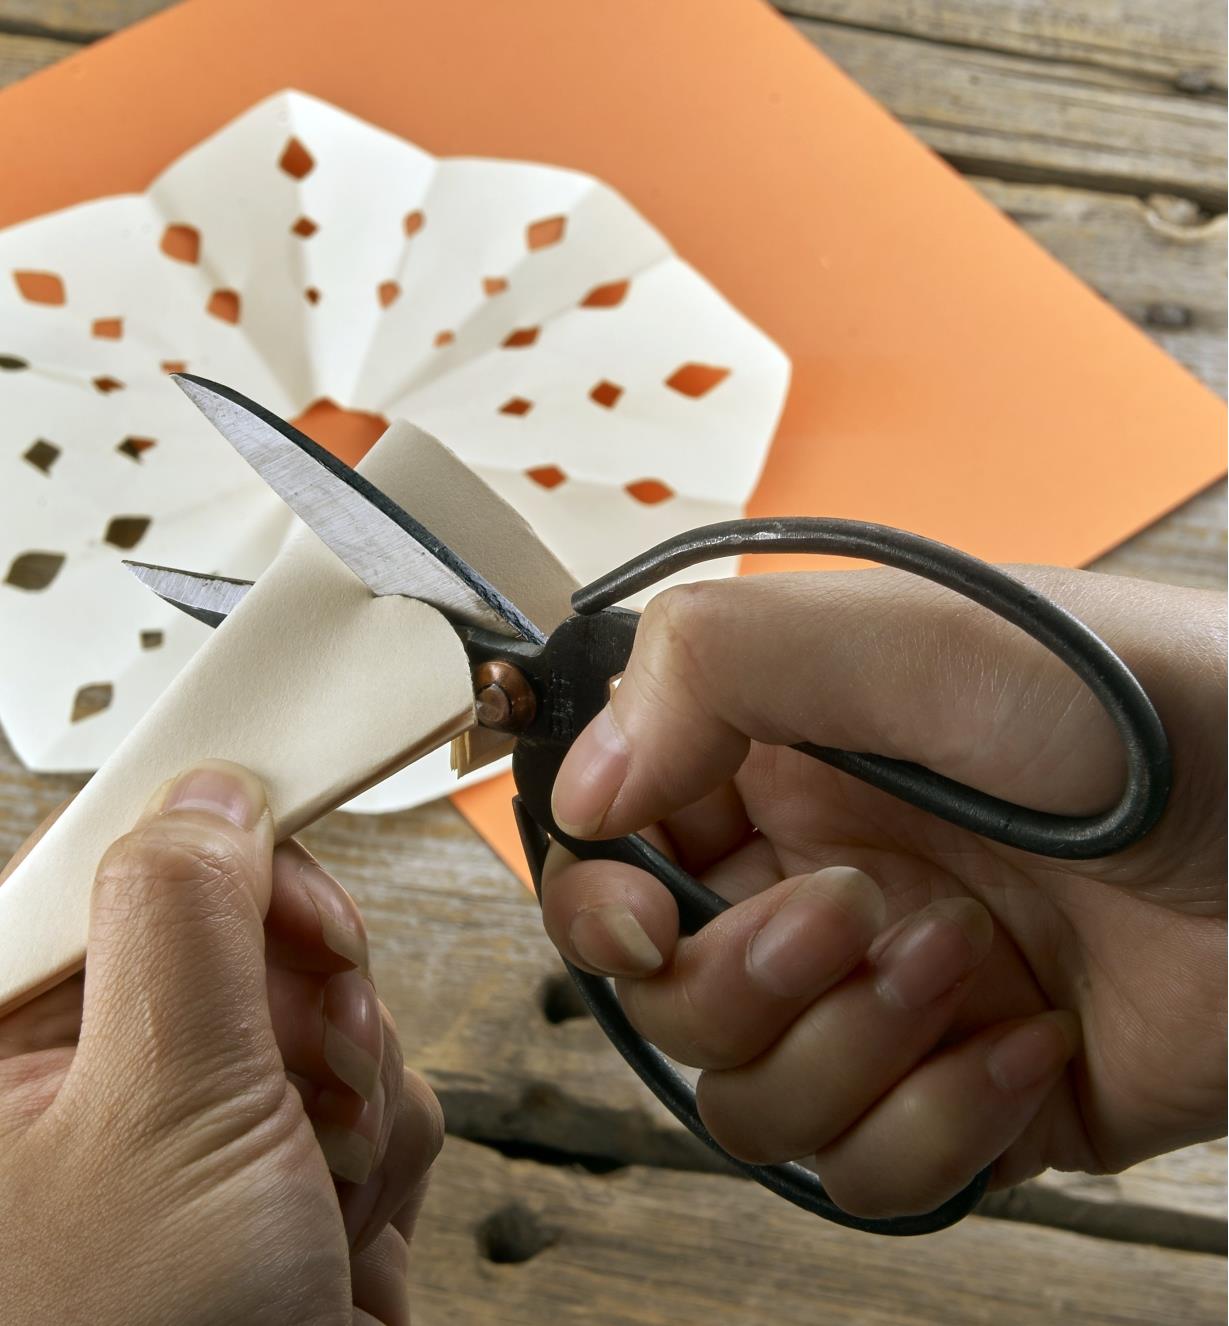 Thick paper being cut with traditional Chinese scissors